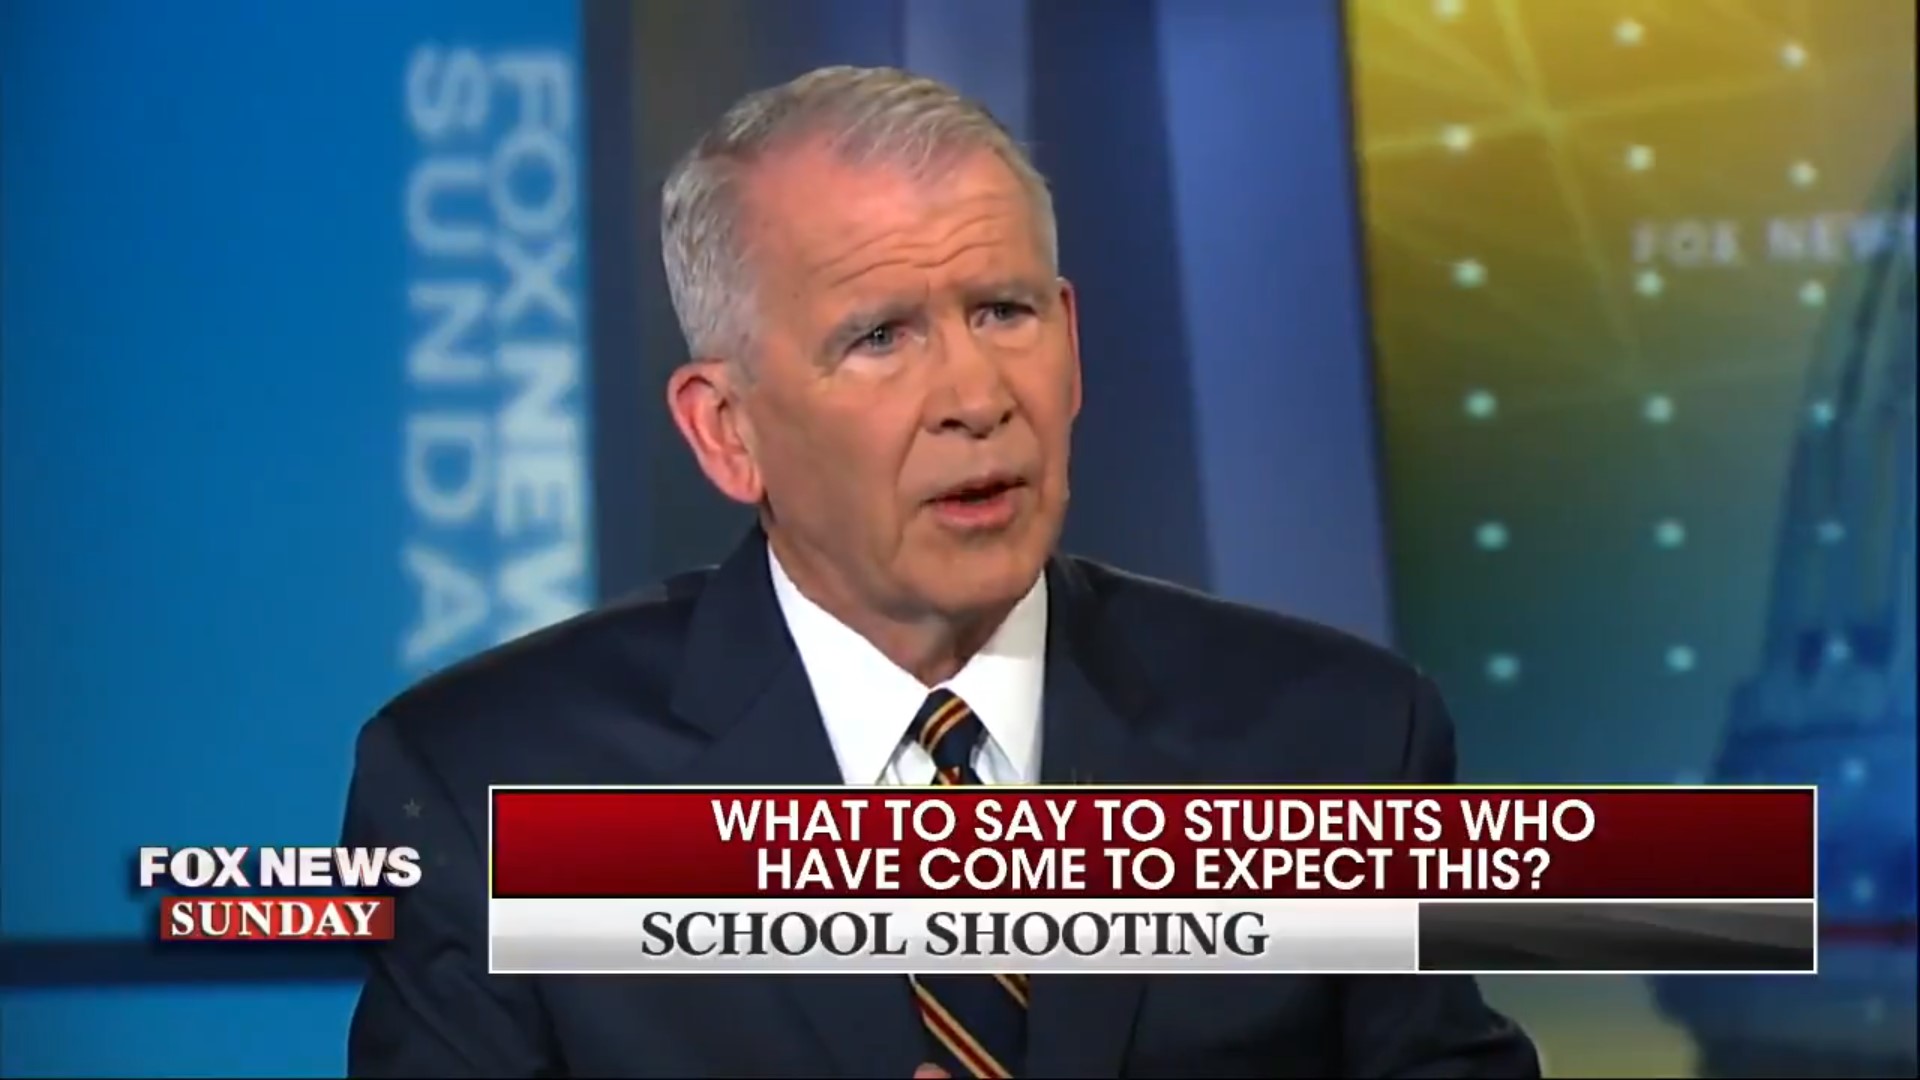 Incoming NRA President Oliver North Claims Ritalin Is To Blame For School Shootings